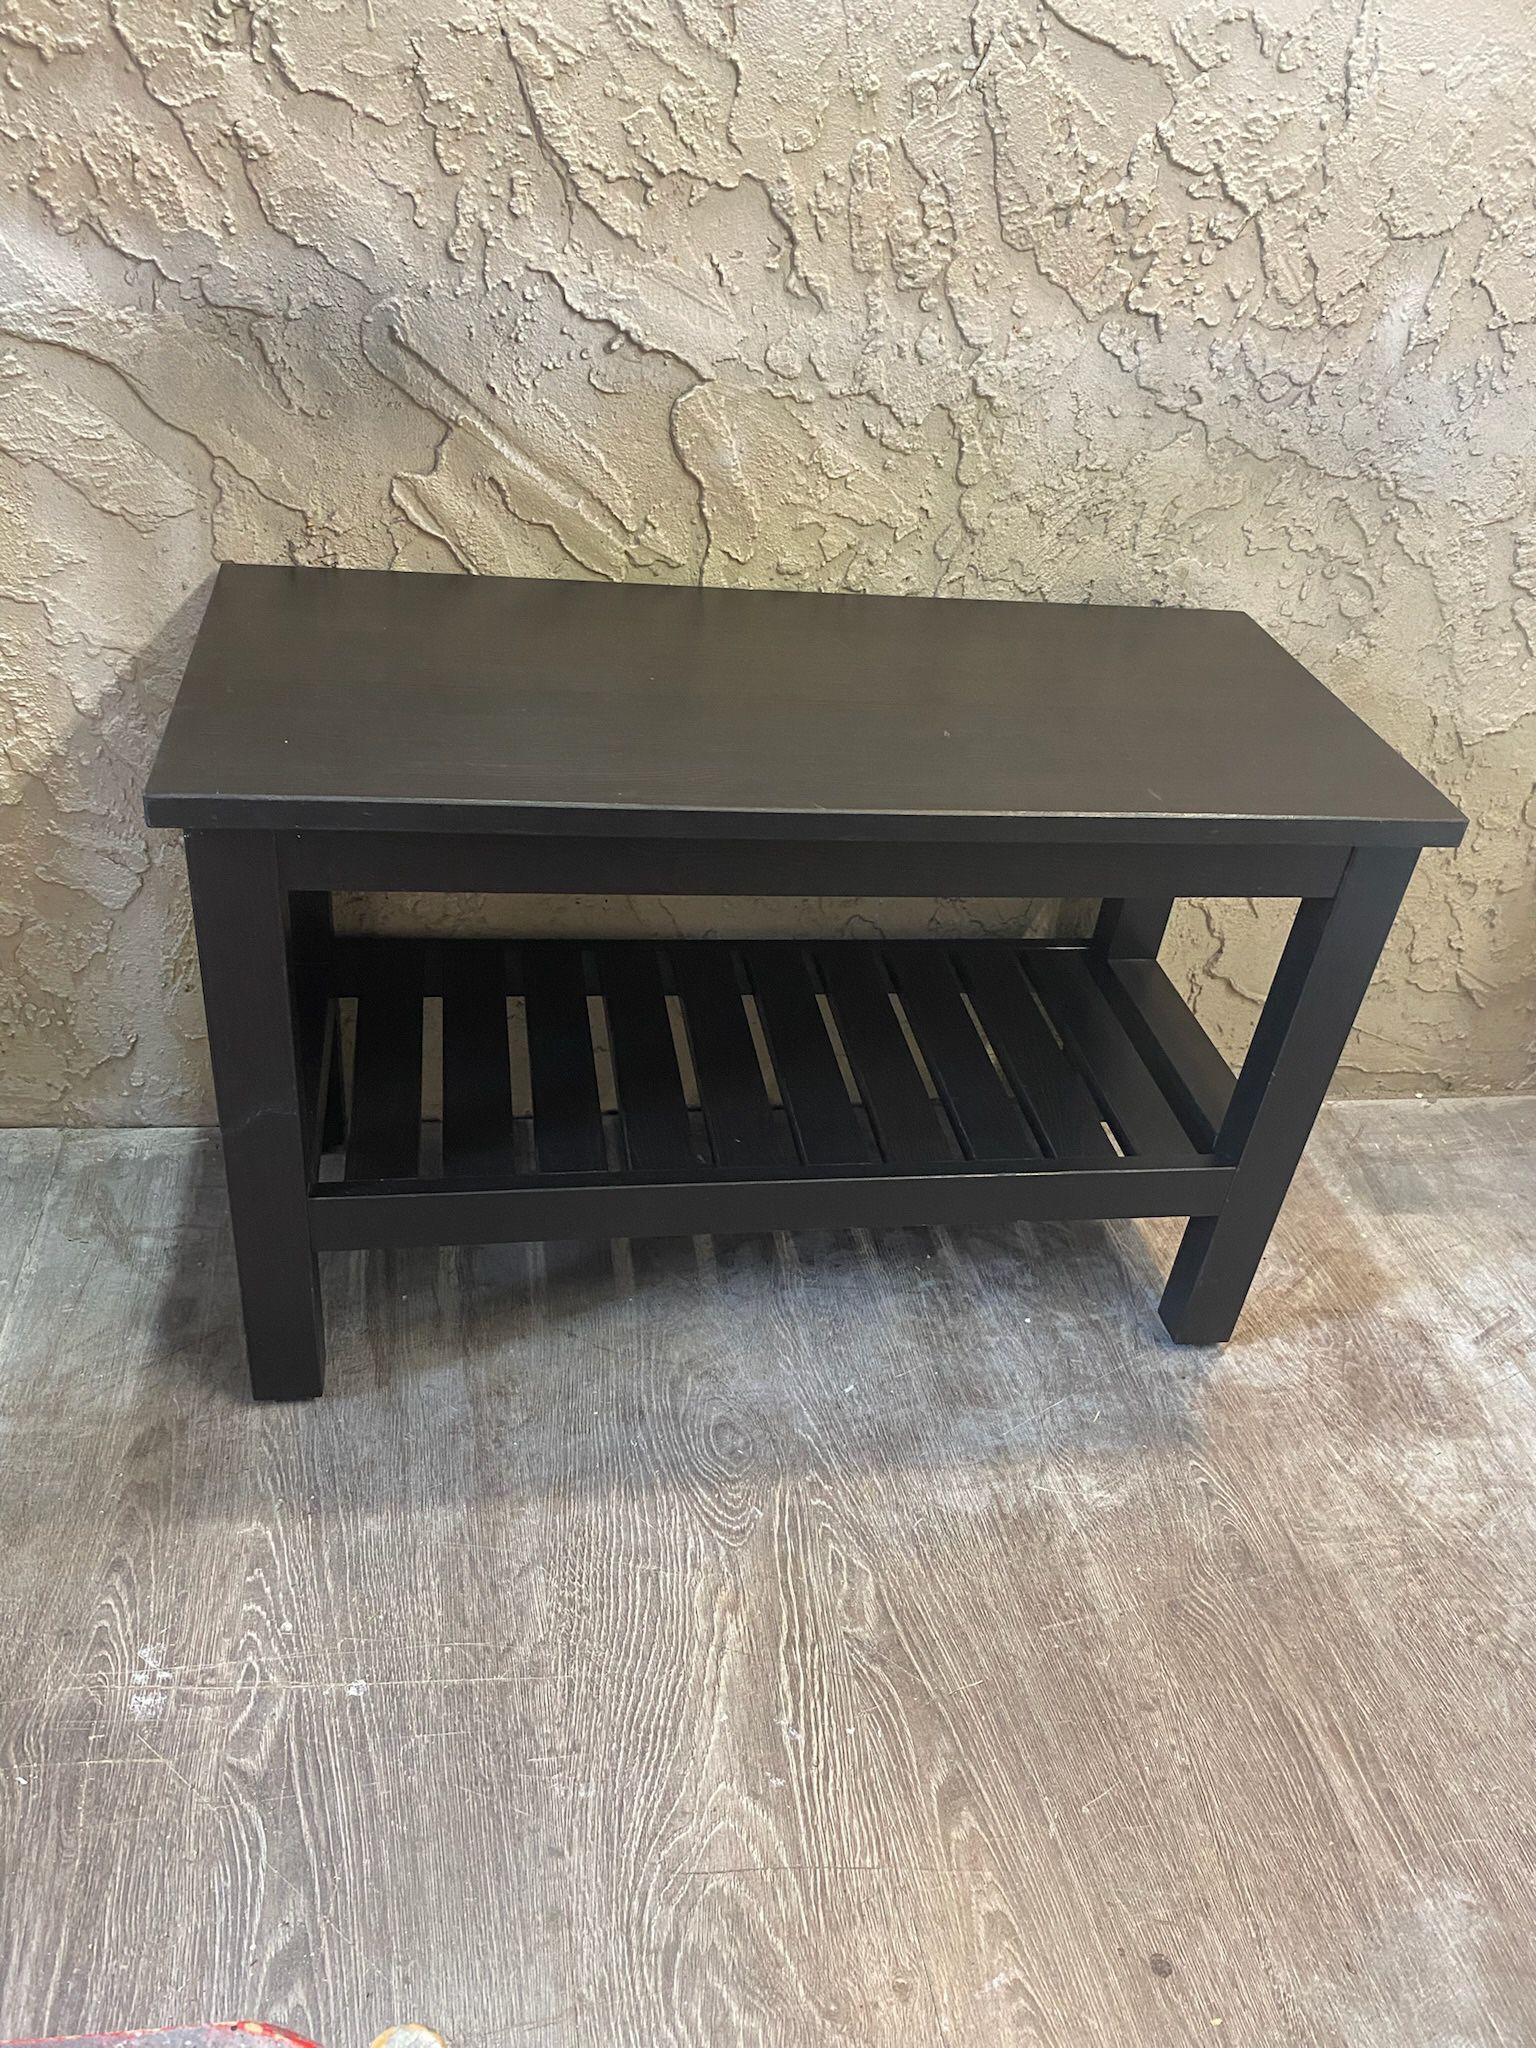 SOLID WOOD IKEA HEMNES BENCH - See My Items